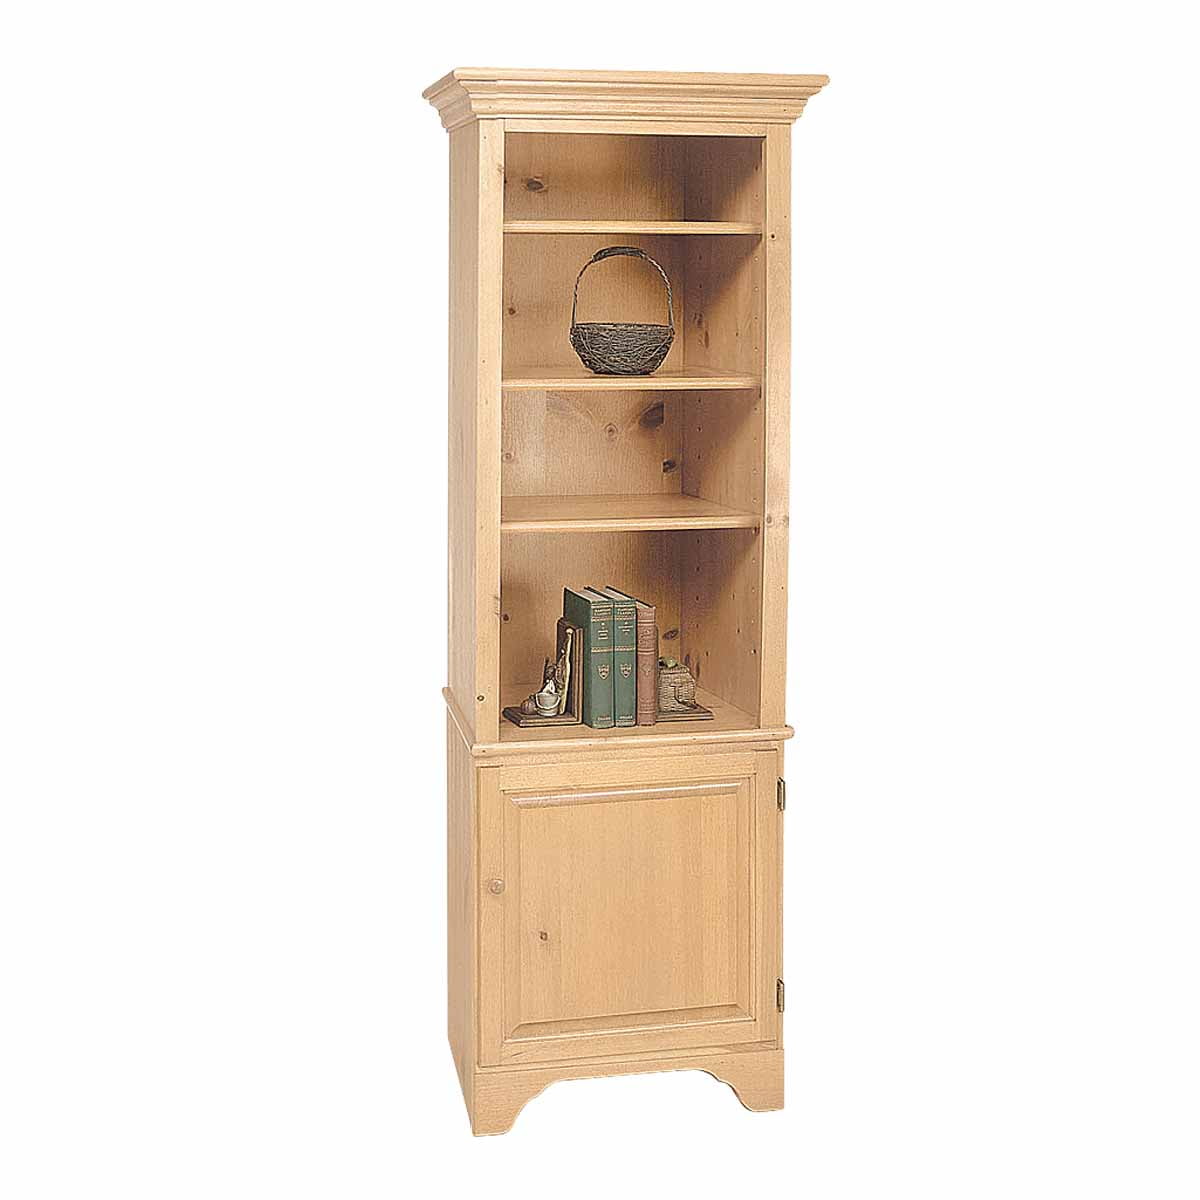 Wooden Bookcase Unfinished Pine Shaker, Unfinished Bookcase With Glass Doors